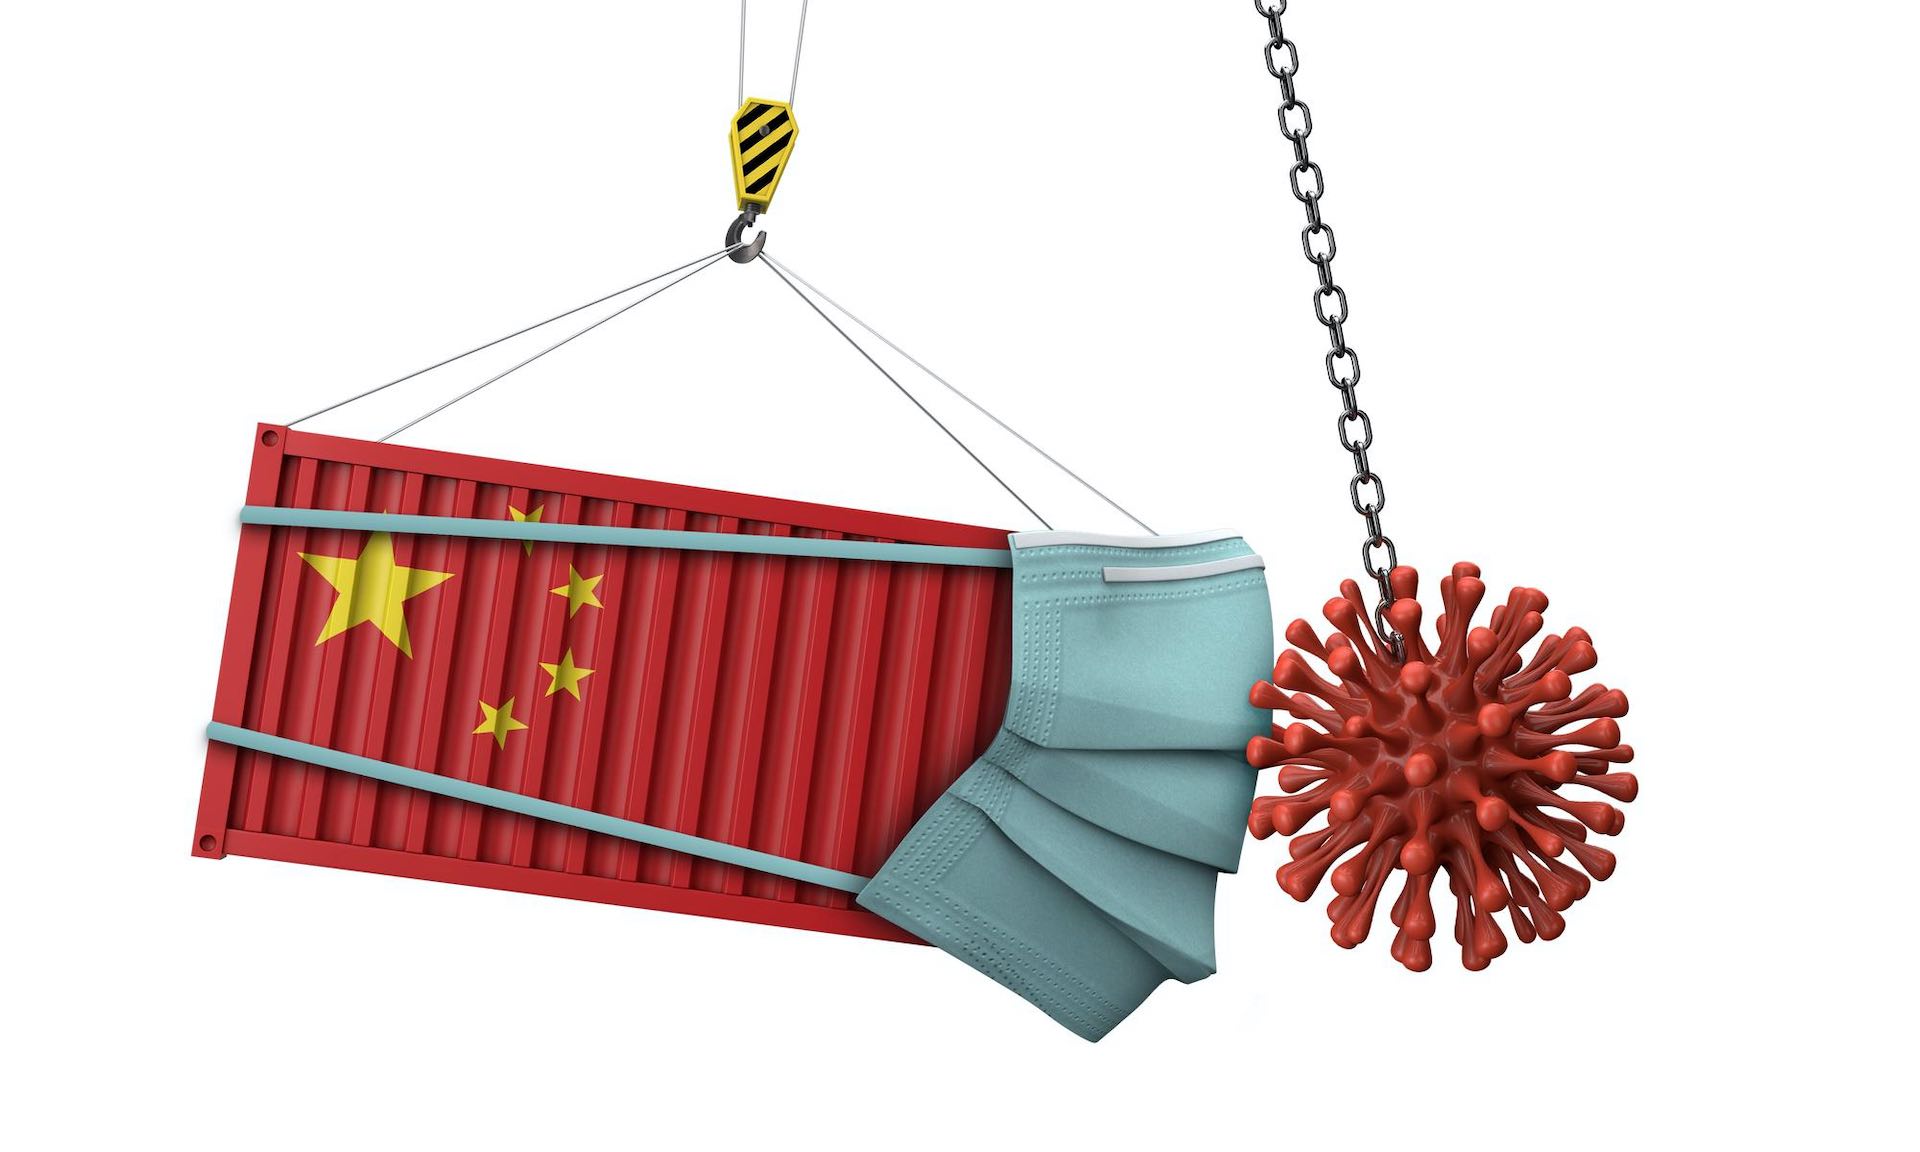 Export growth in China sinks in August, while imports shrink